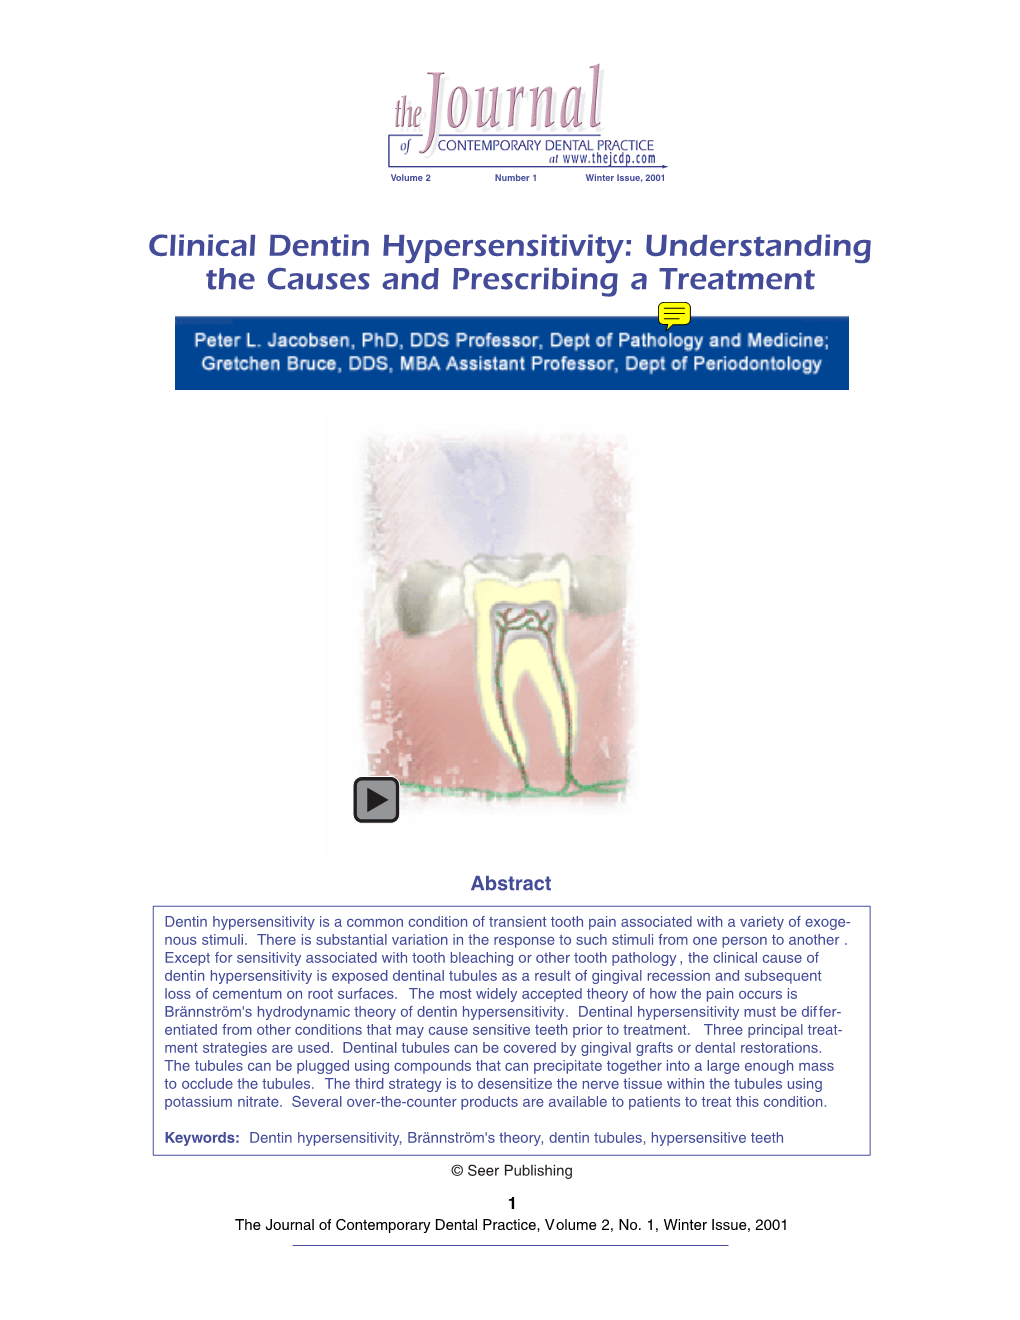 Clinical Dentin Hypersensitivity: Understanding the Causes and Prescribing a Treatment